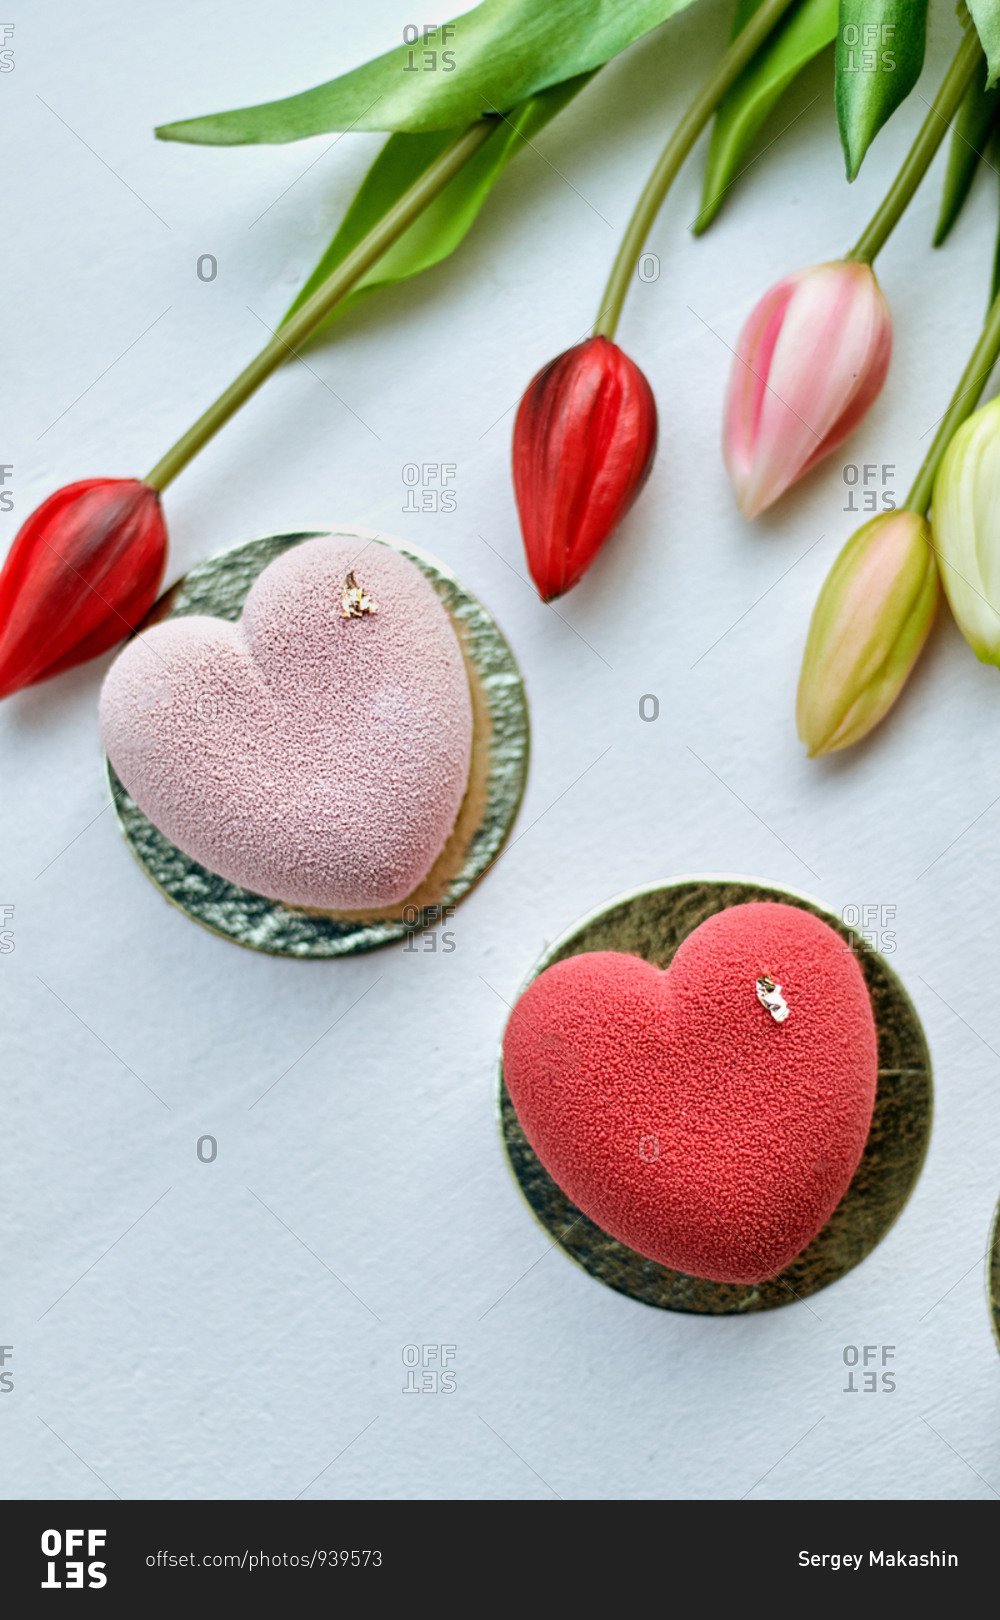 women's day Valentine mousse cake in the form of a heart
with a matte surface and tulips stock photo - OFFSET